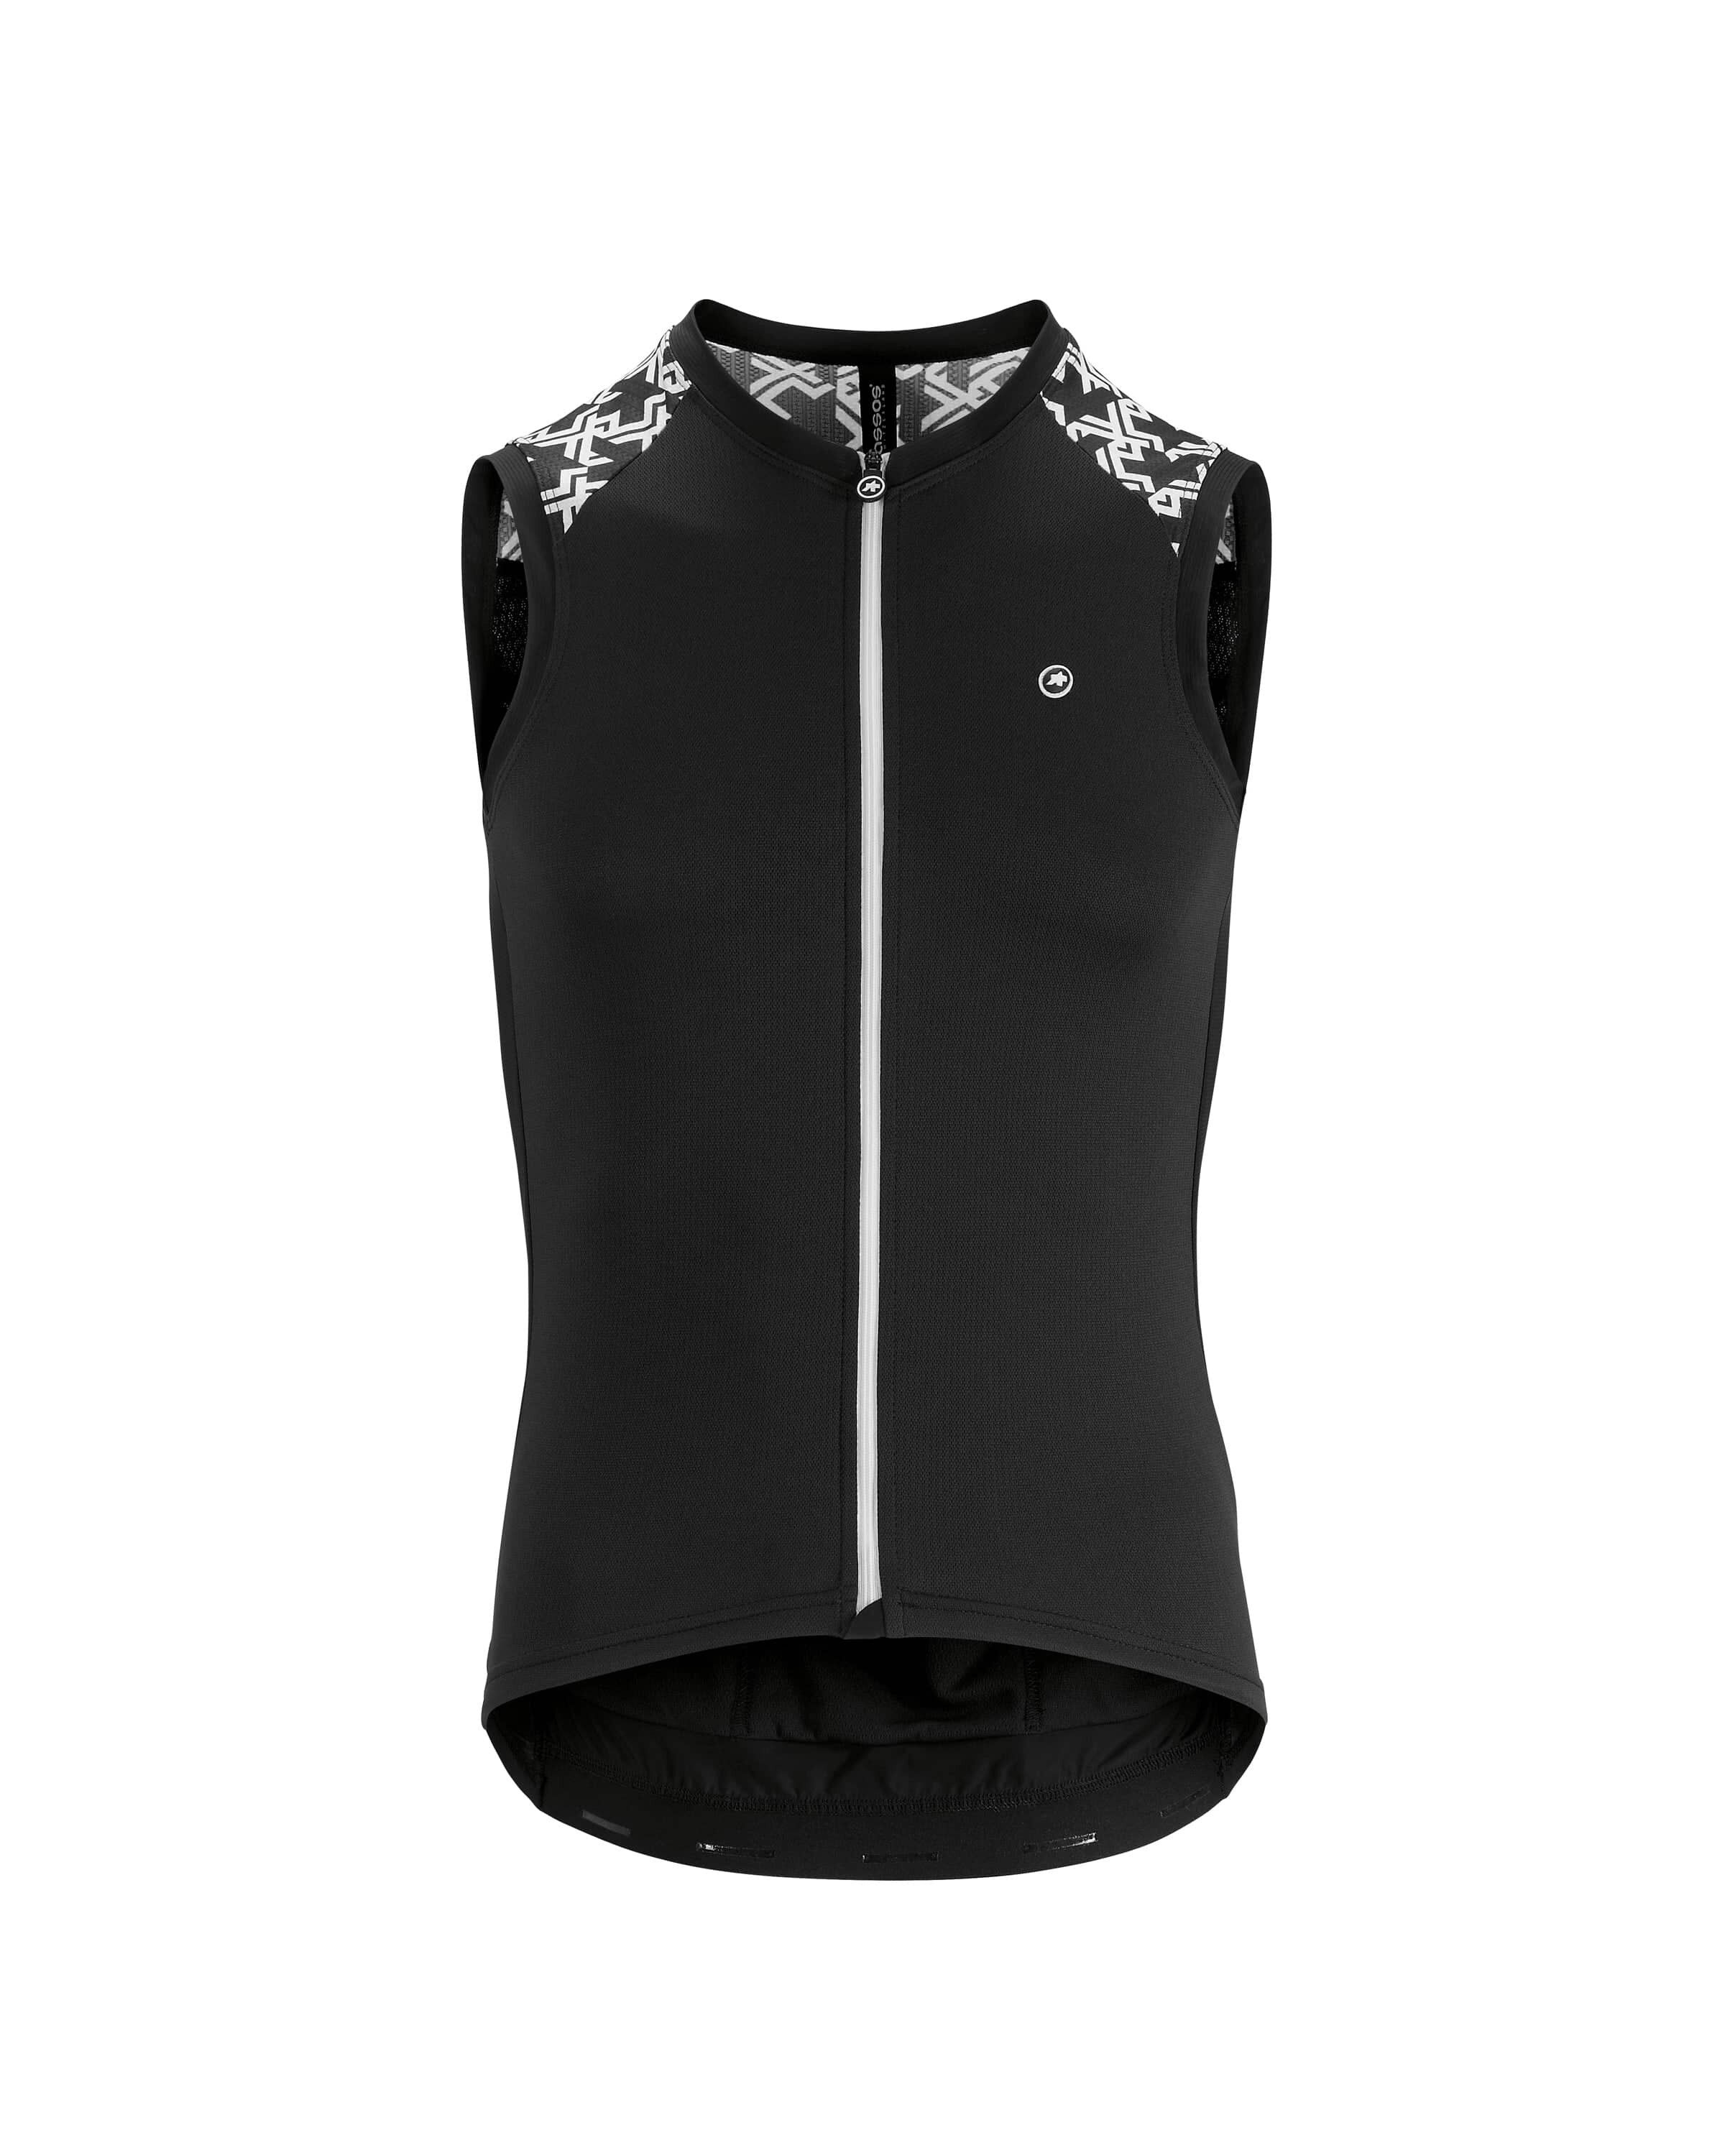 Assos Mille GT NS Jersey - Maillot ciclismo - Hombre